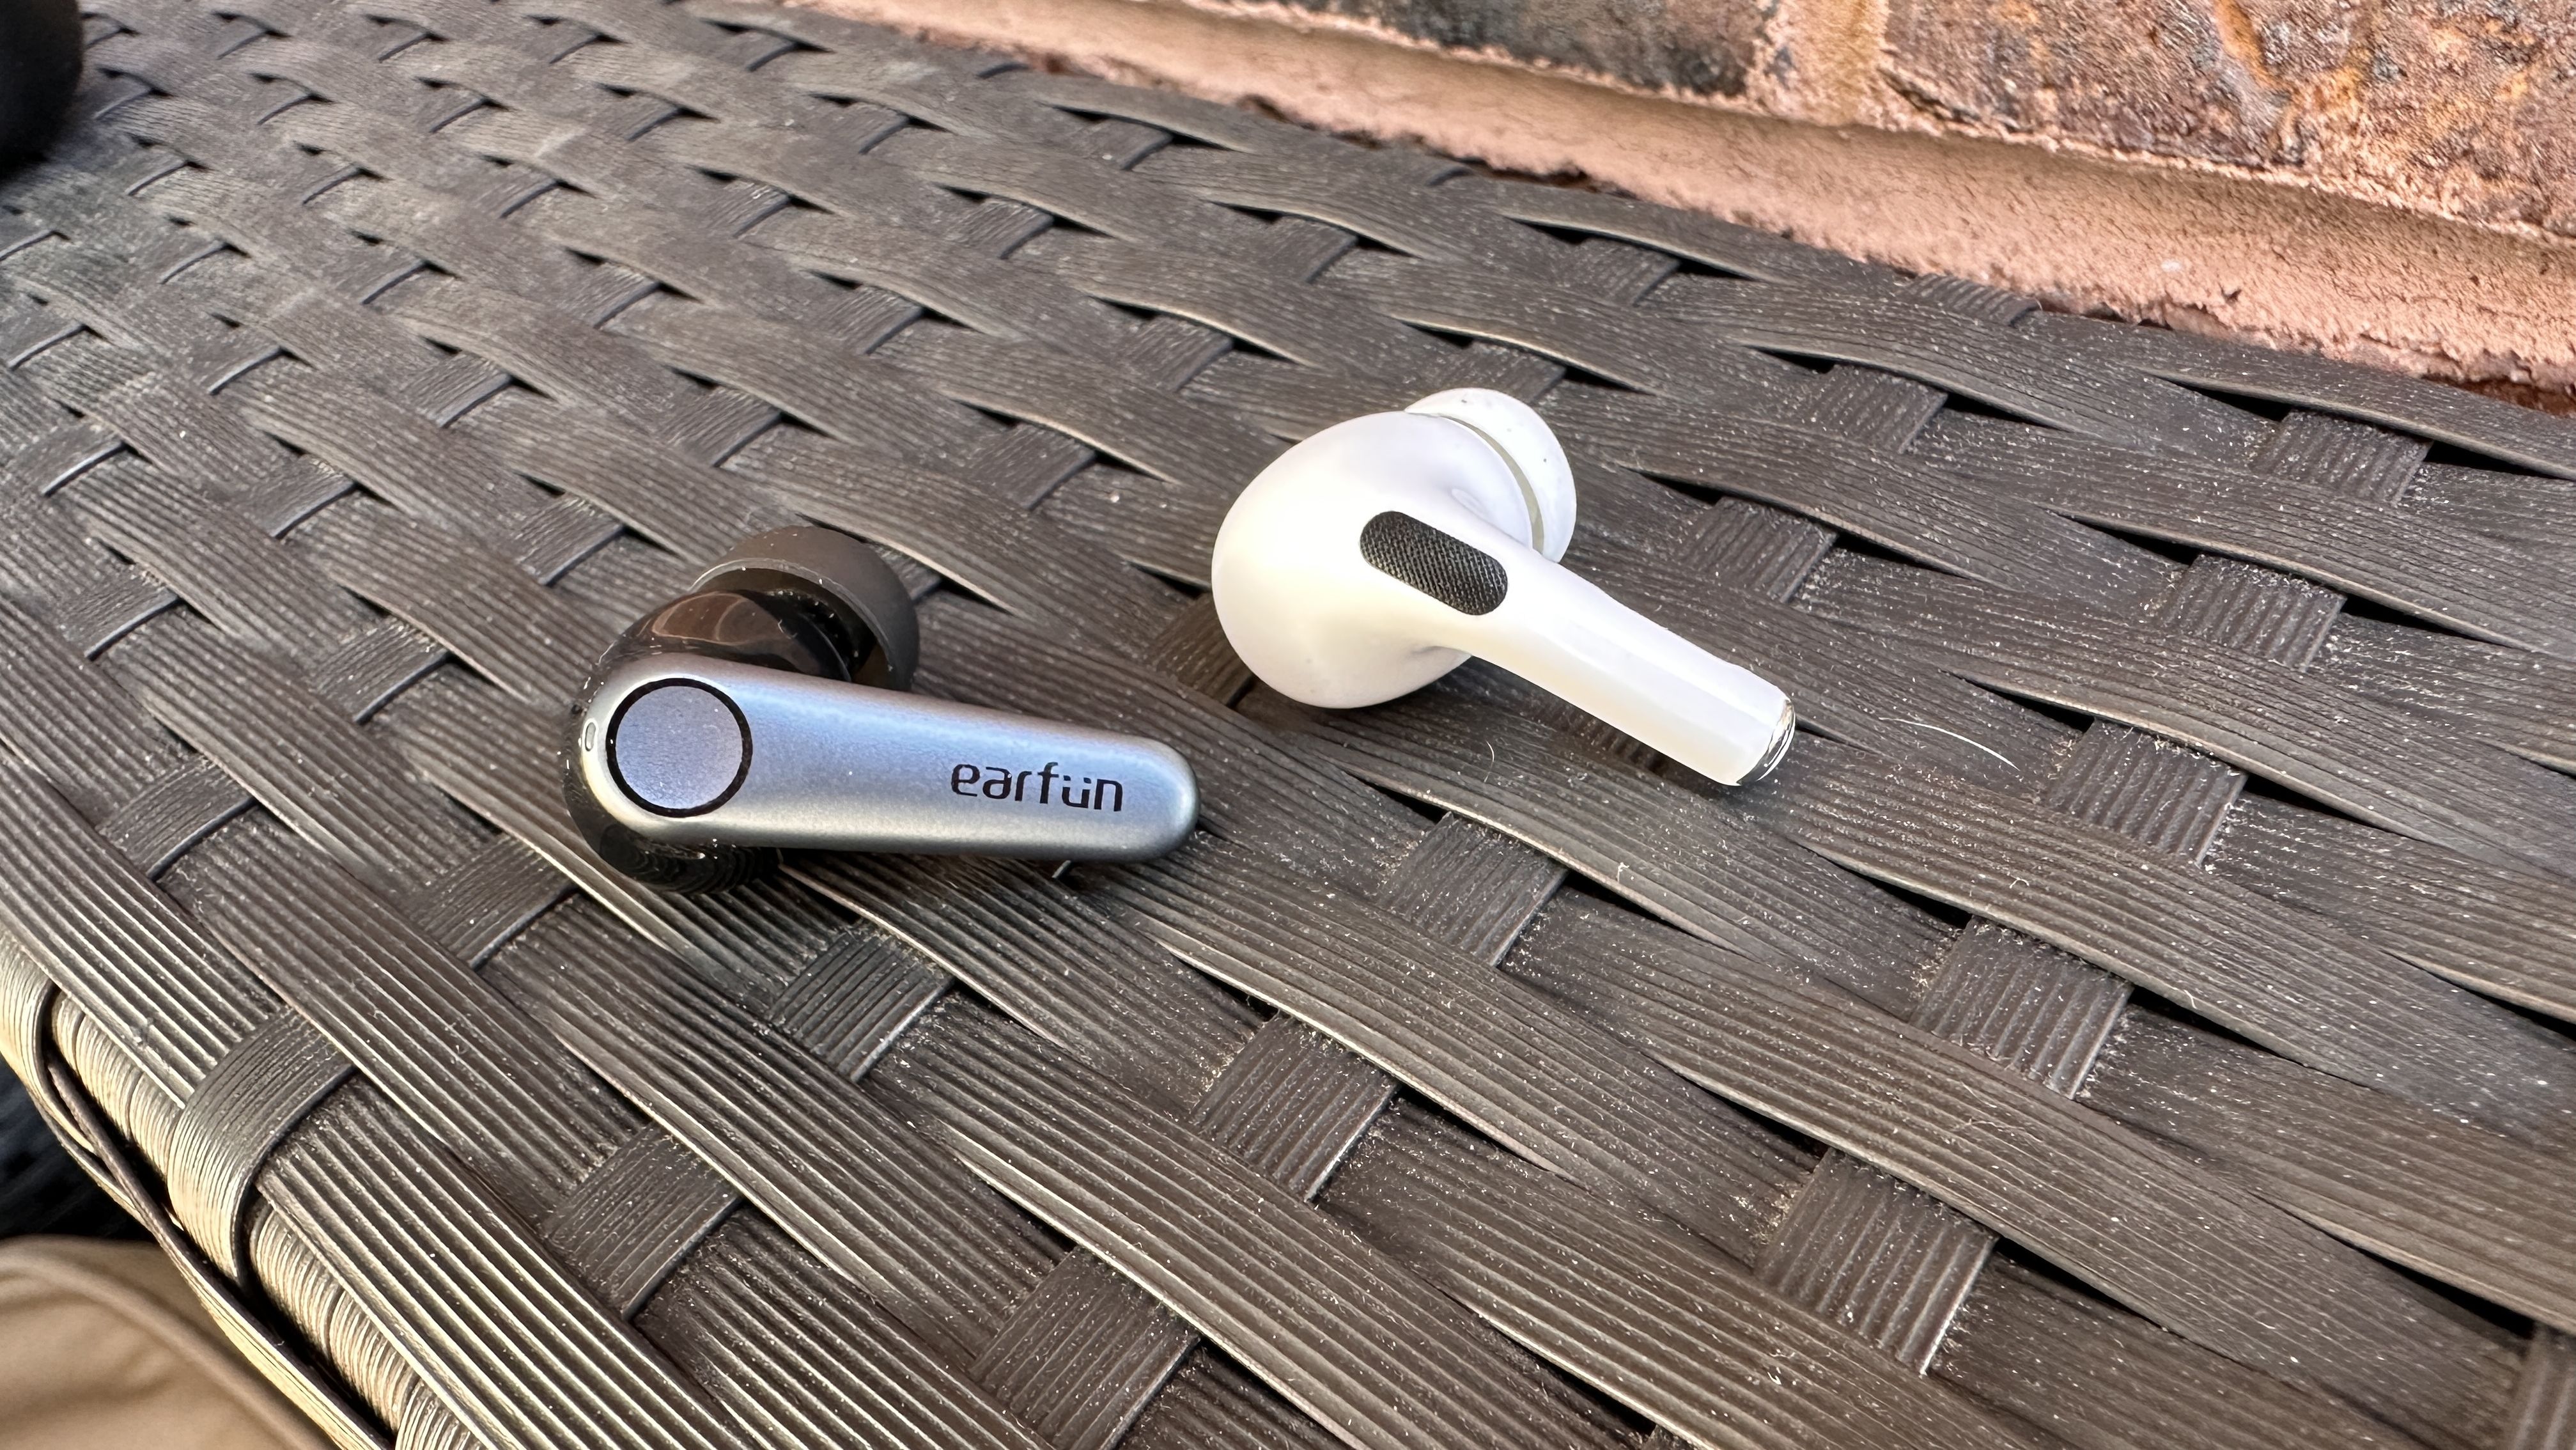 EarFun Air True Wireless Earbuds Review: These Budget Earphones Are  Mesmerizing! - HIFI Trends